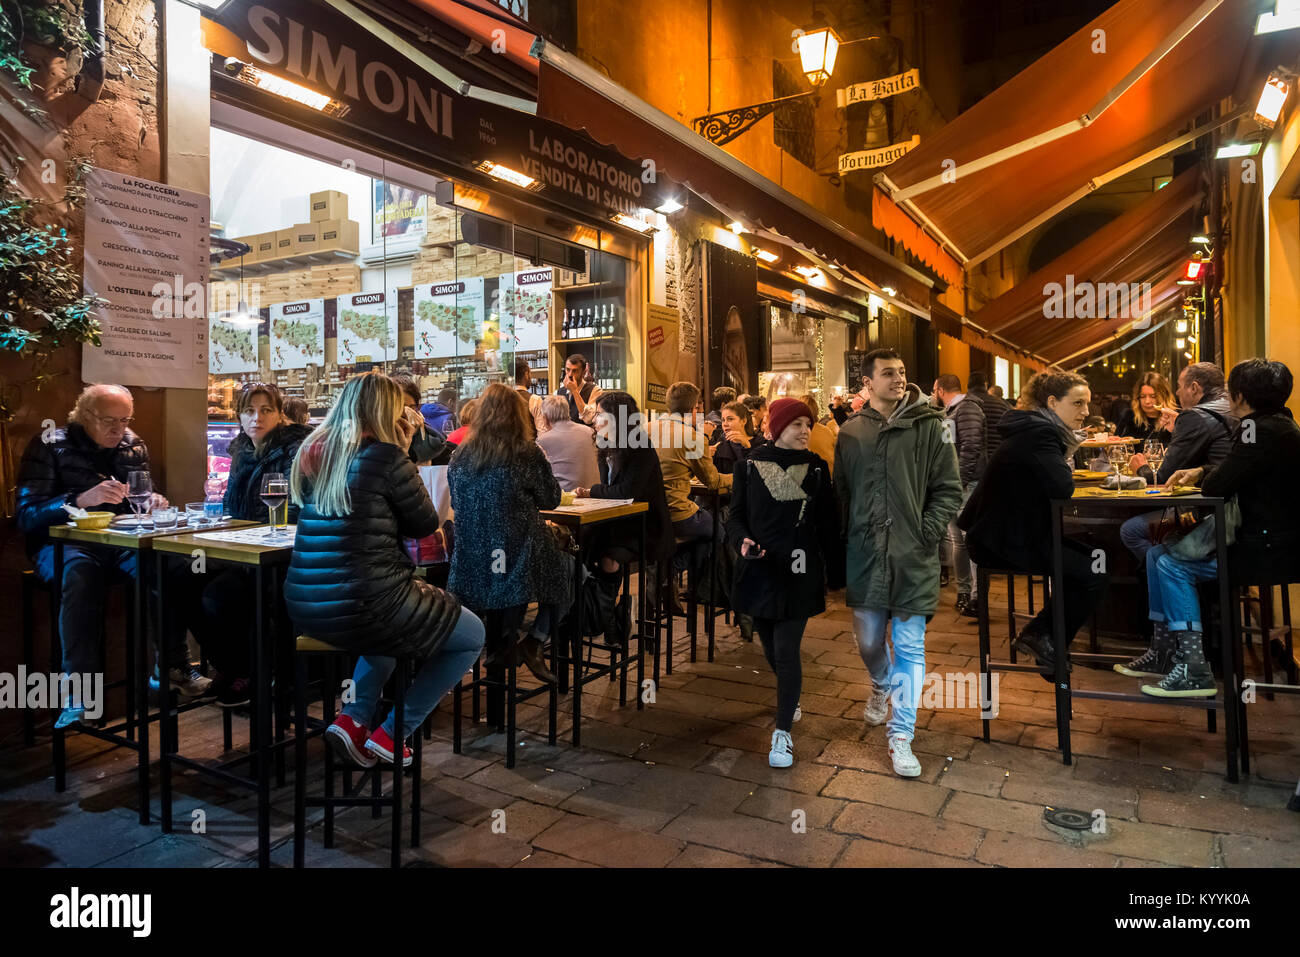 Bologna, Italy - people out for the evening eating and drinking in cafes and restaurants in Via Pescherie Vecchie, Bologna city Stock Photo